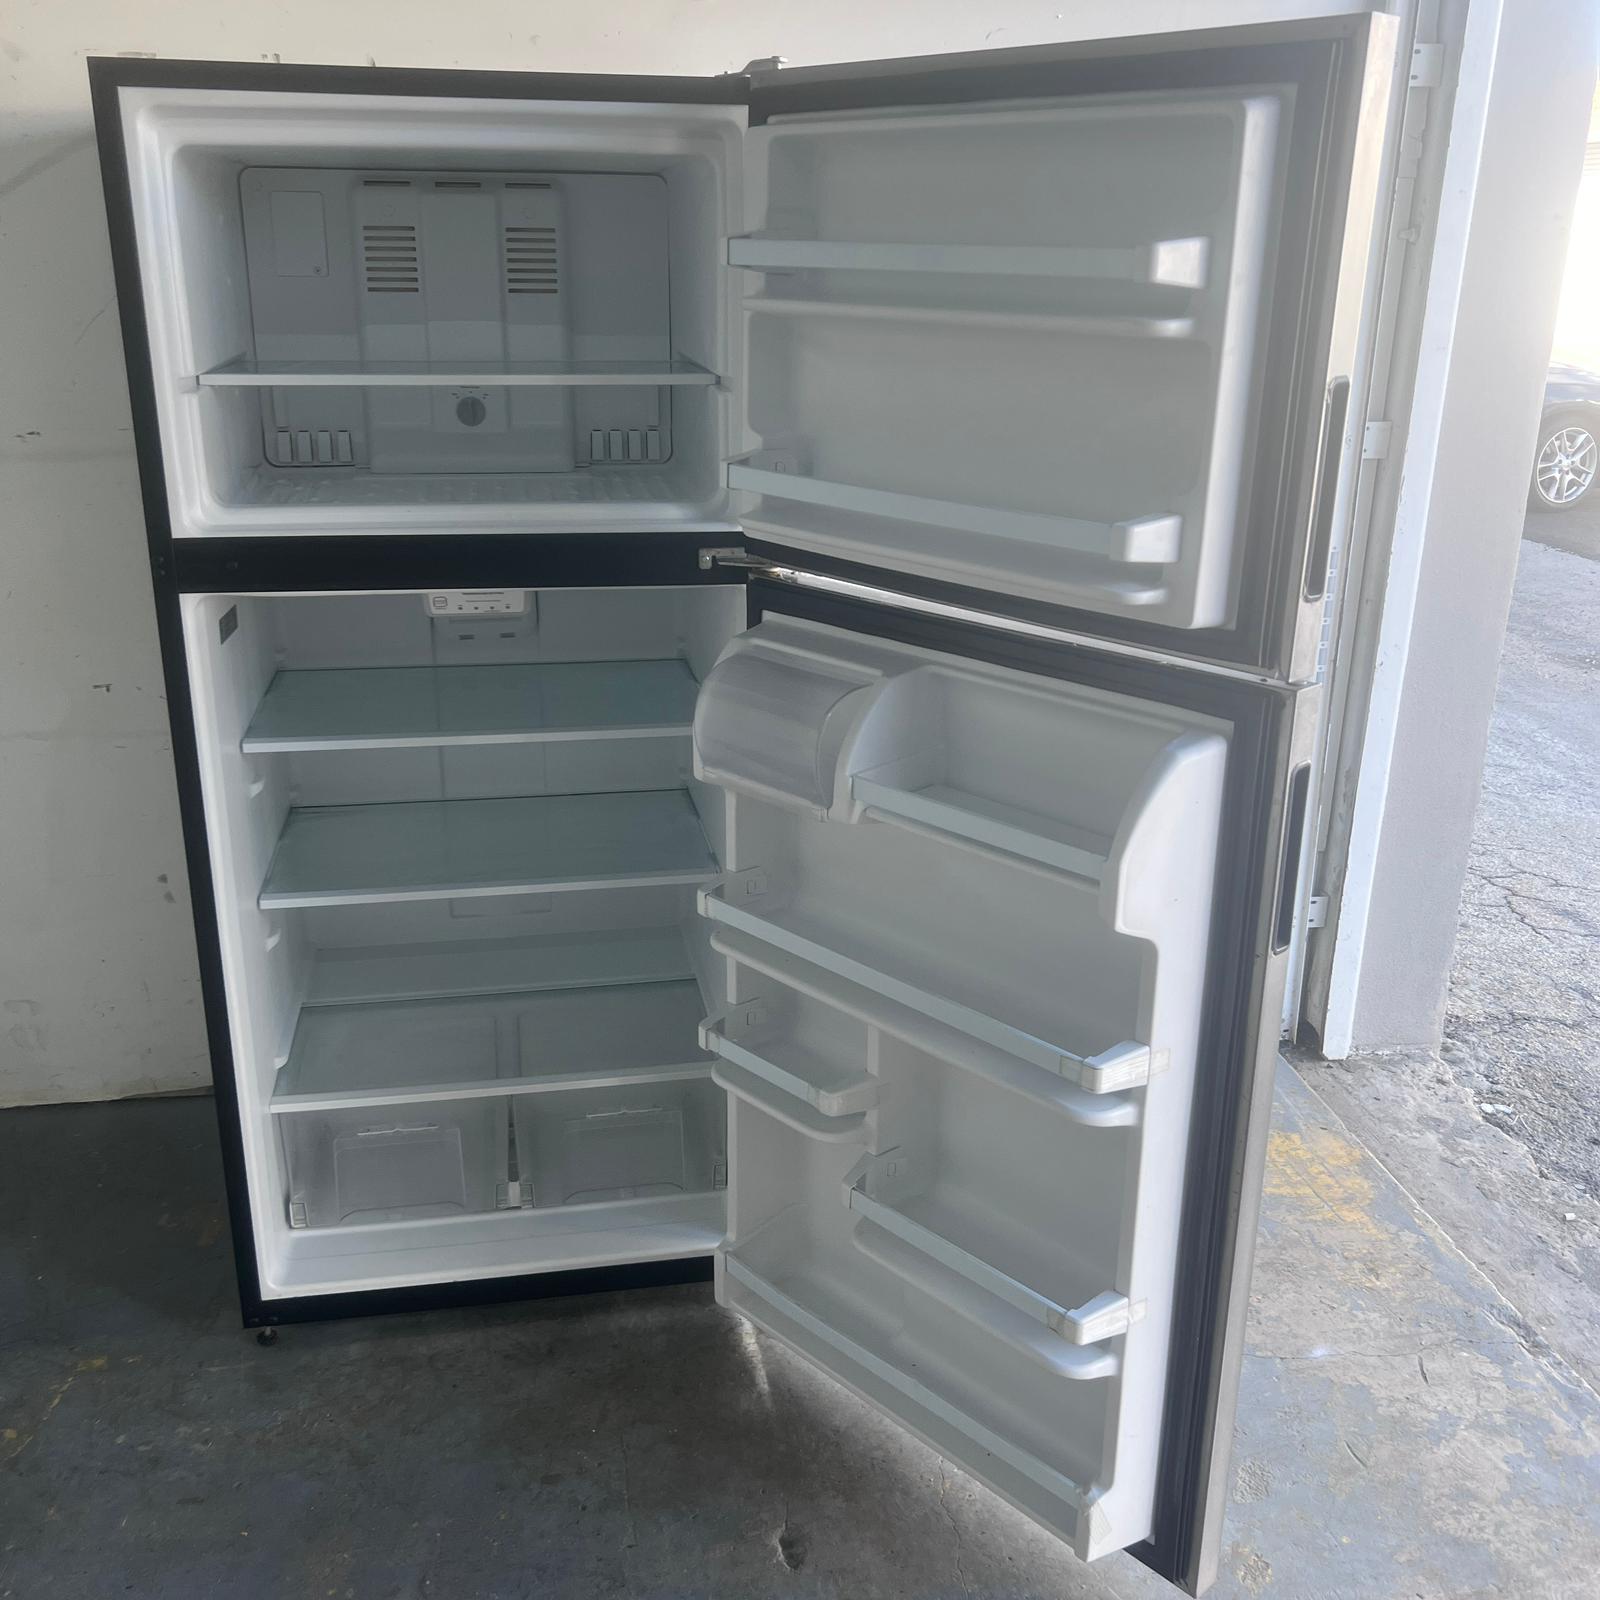 Amana Stainless Steel Top and Bottom Refrigerator